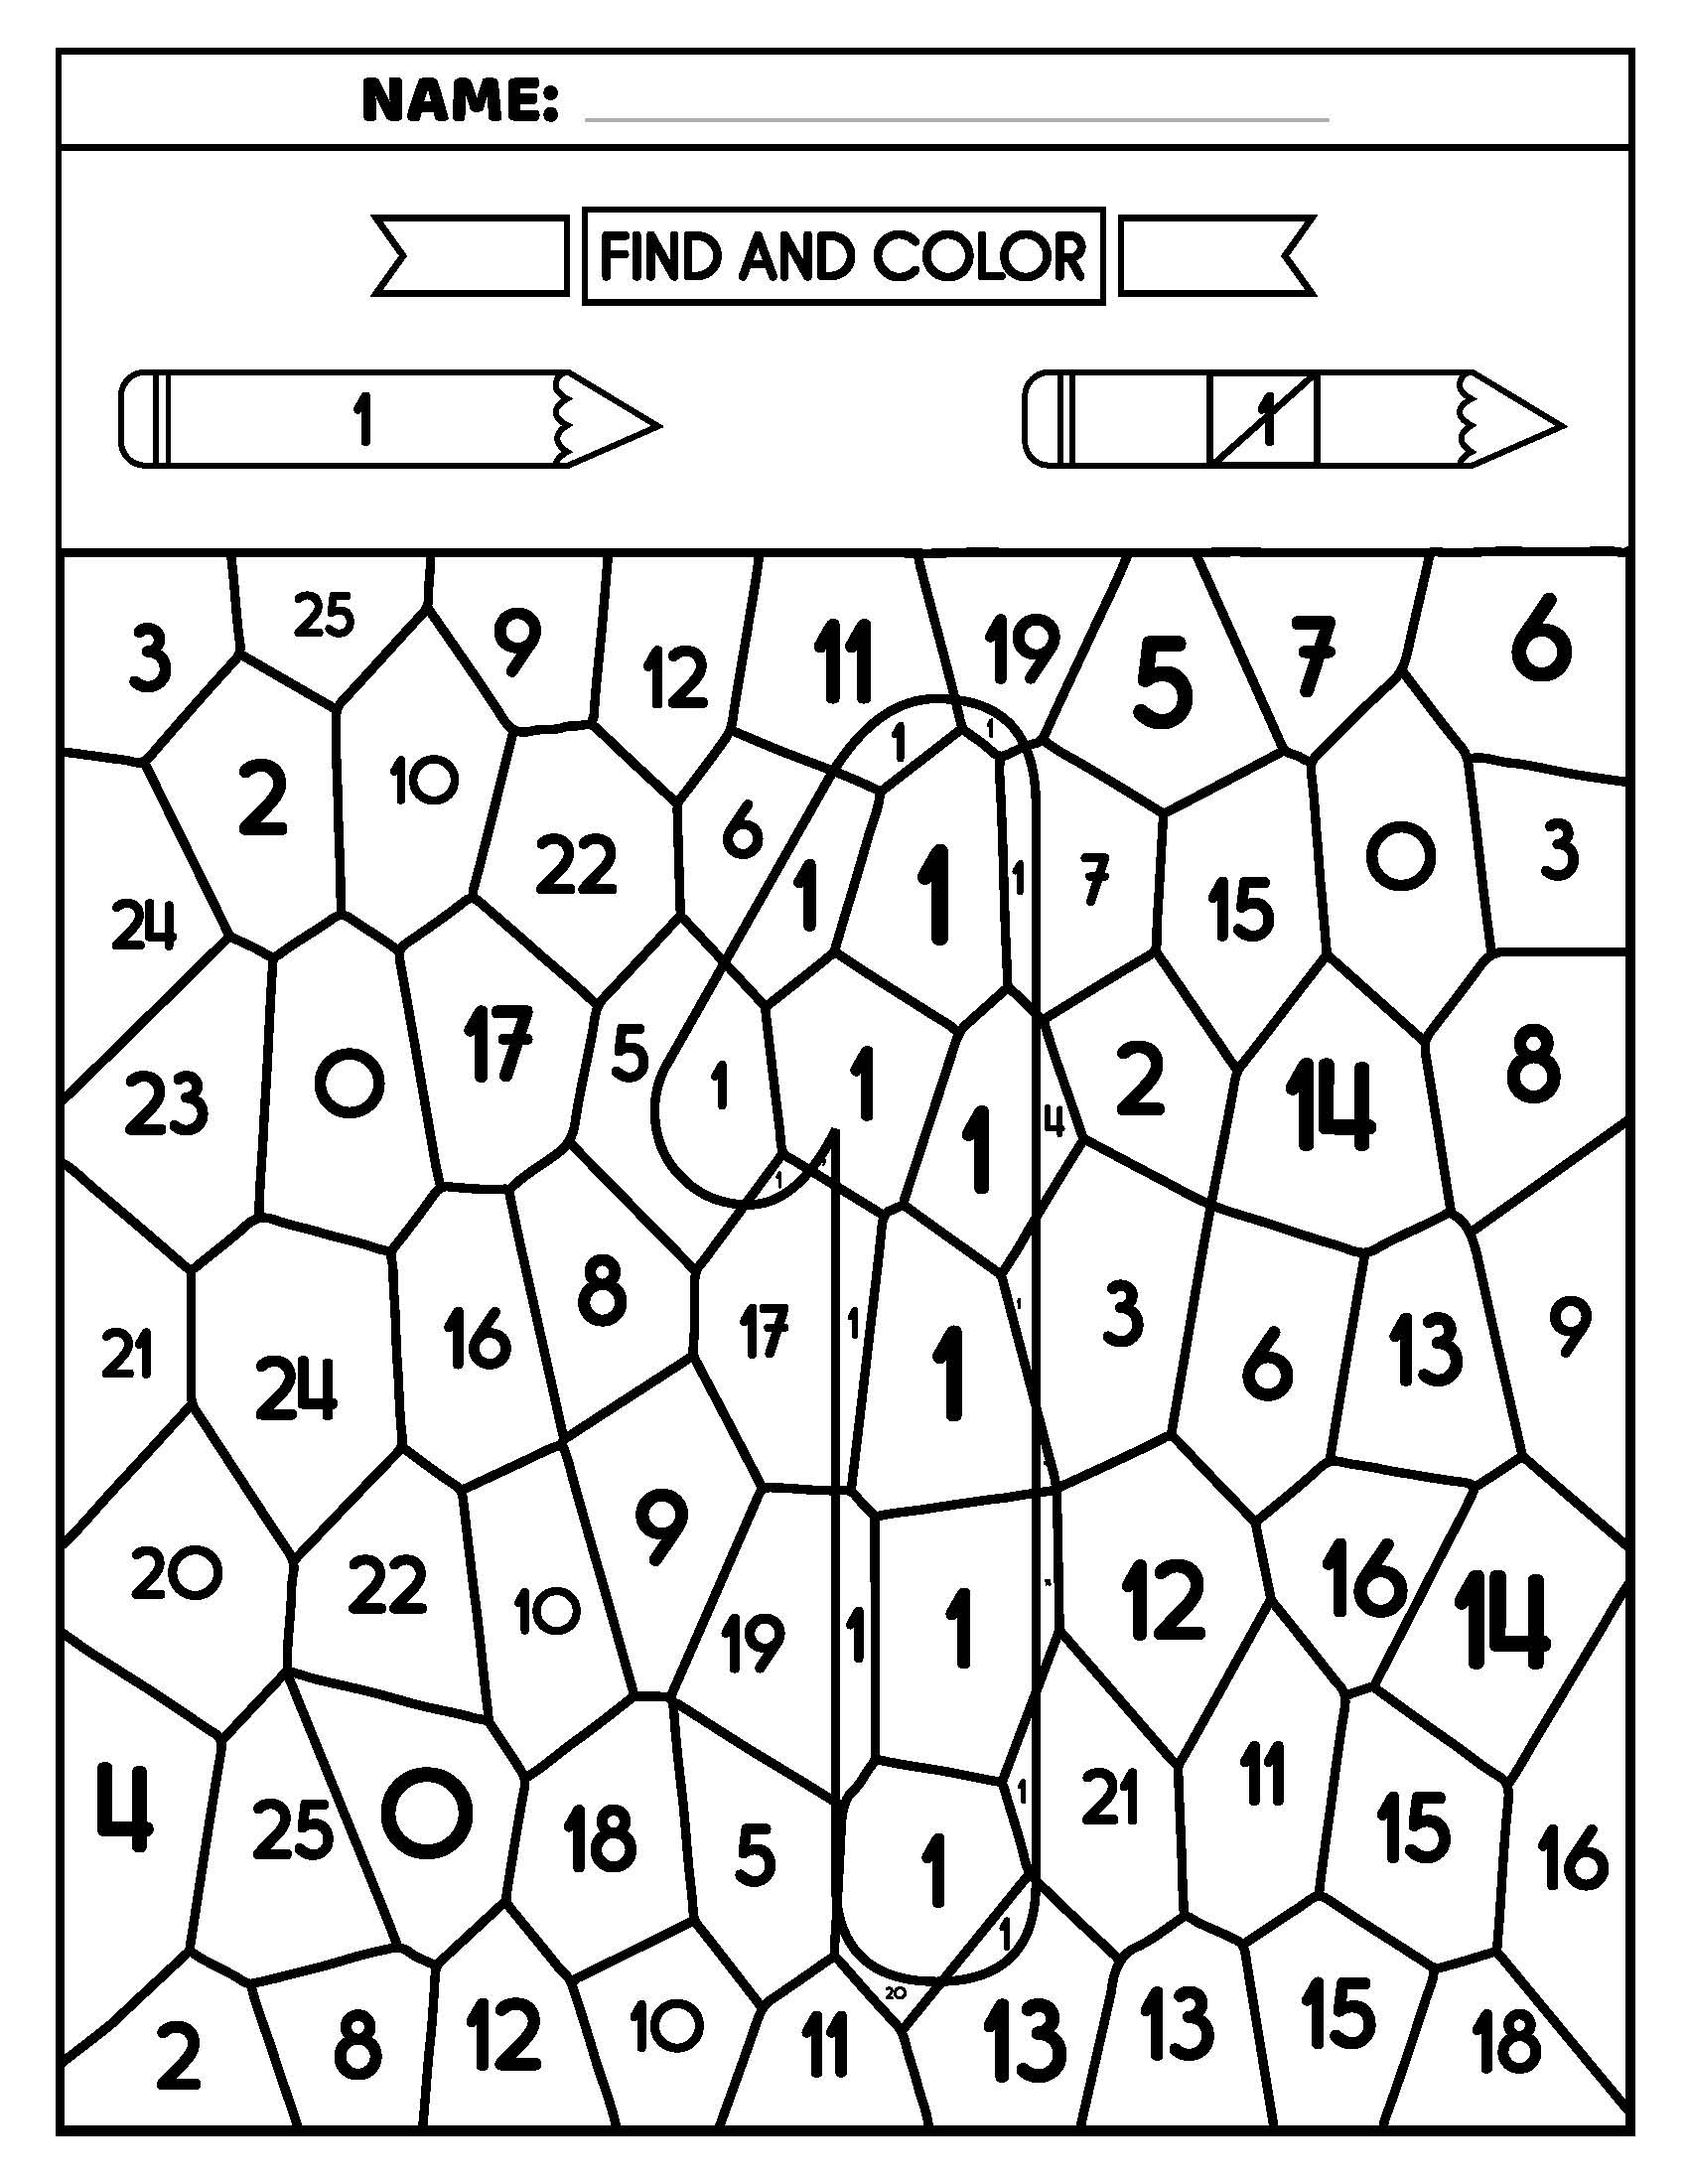 Color by number worksheet color by code worksheets and teaching materials made by teachers